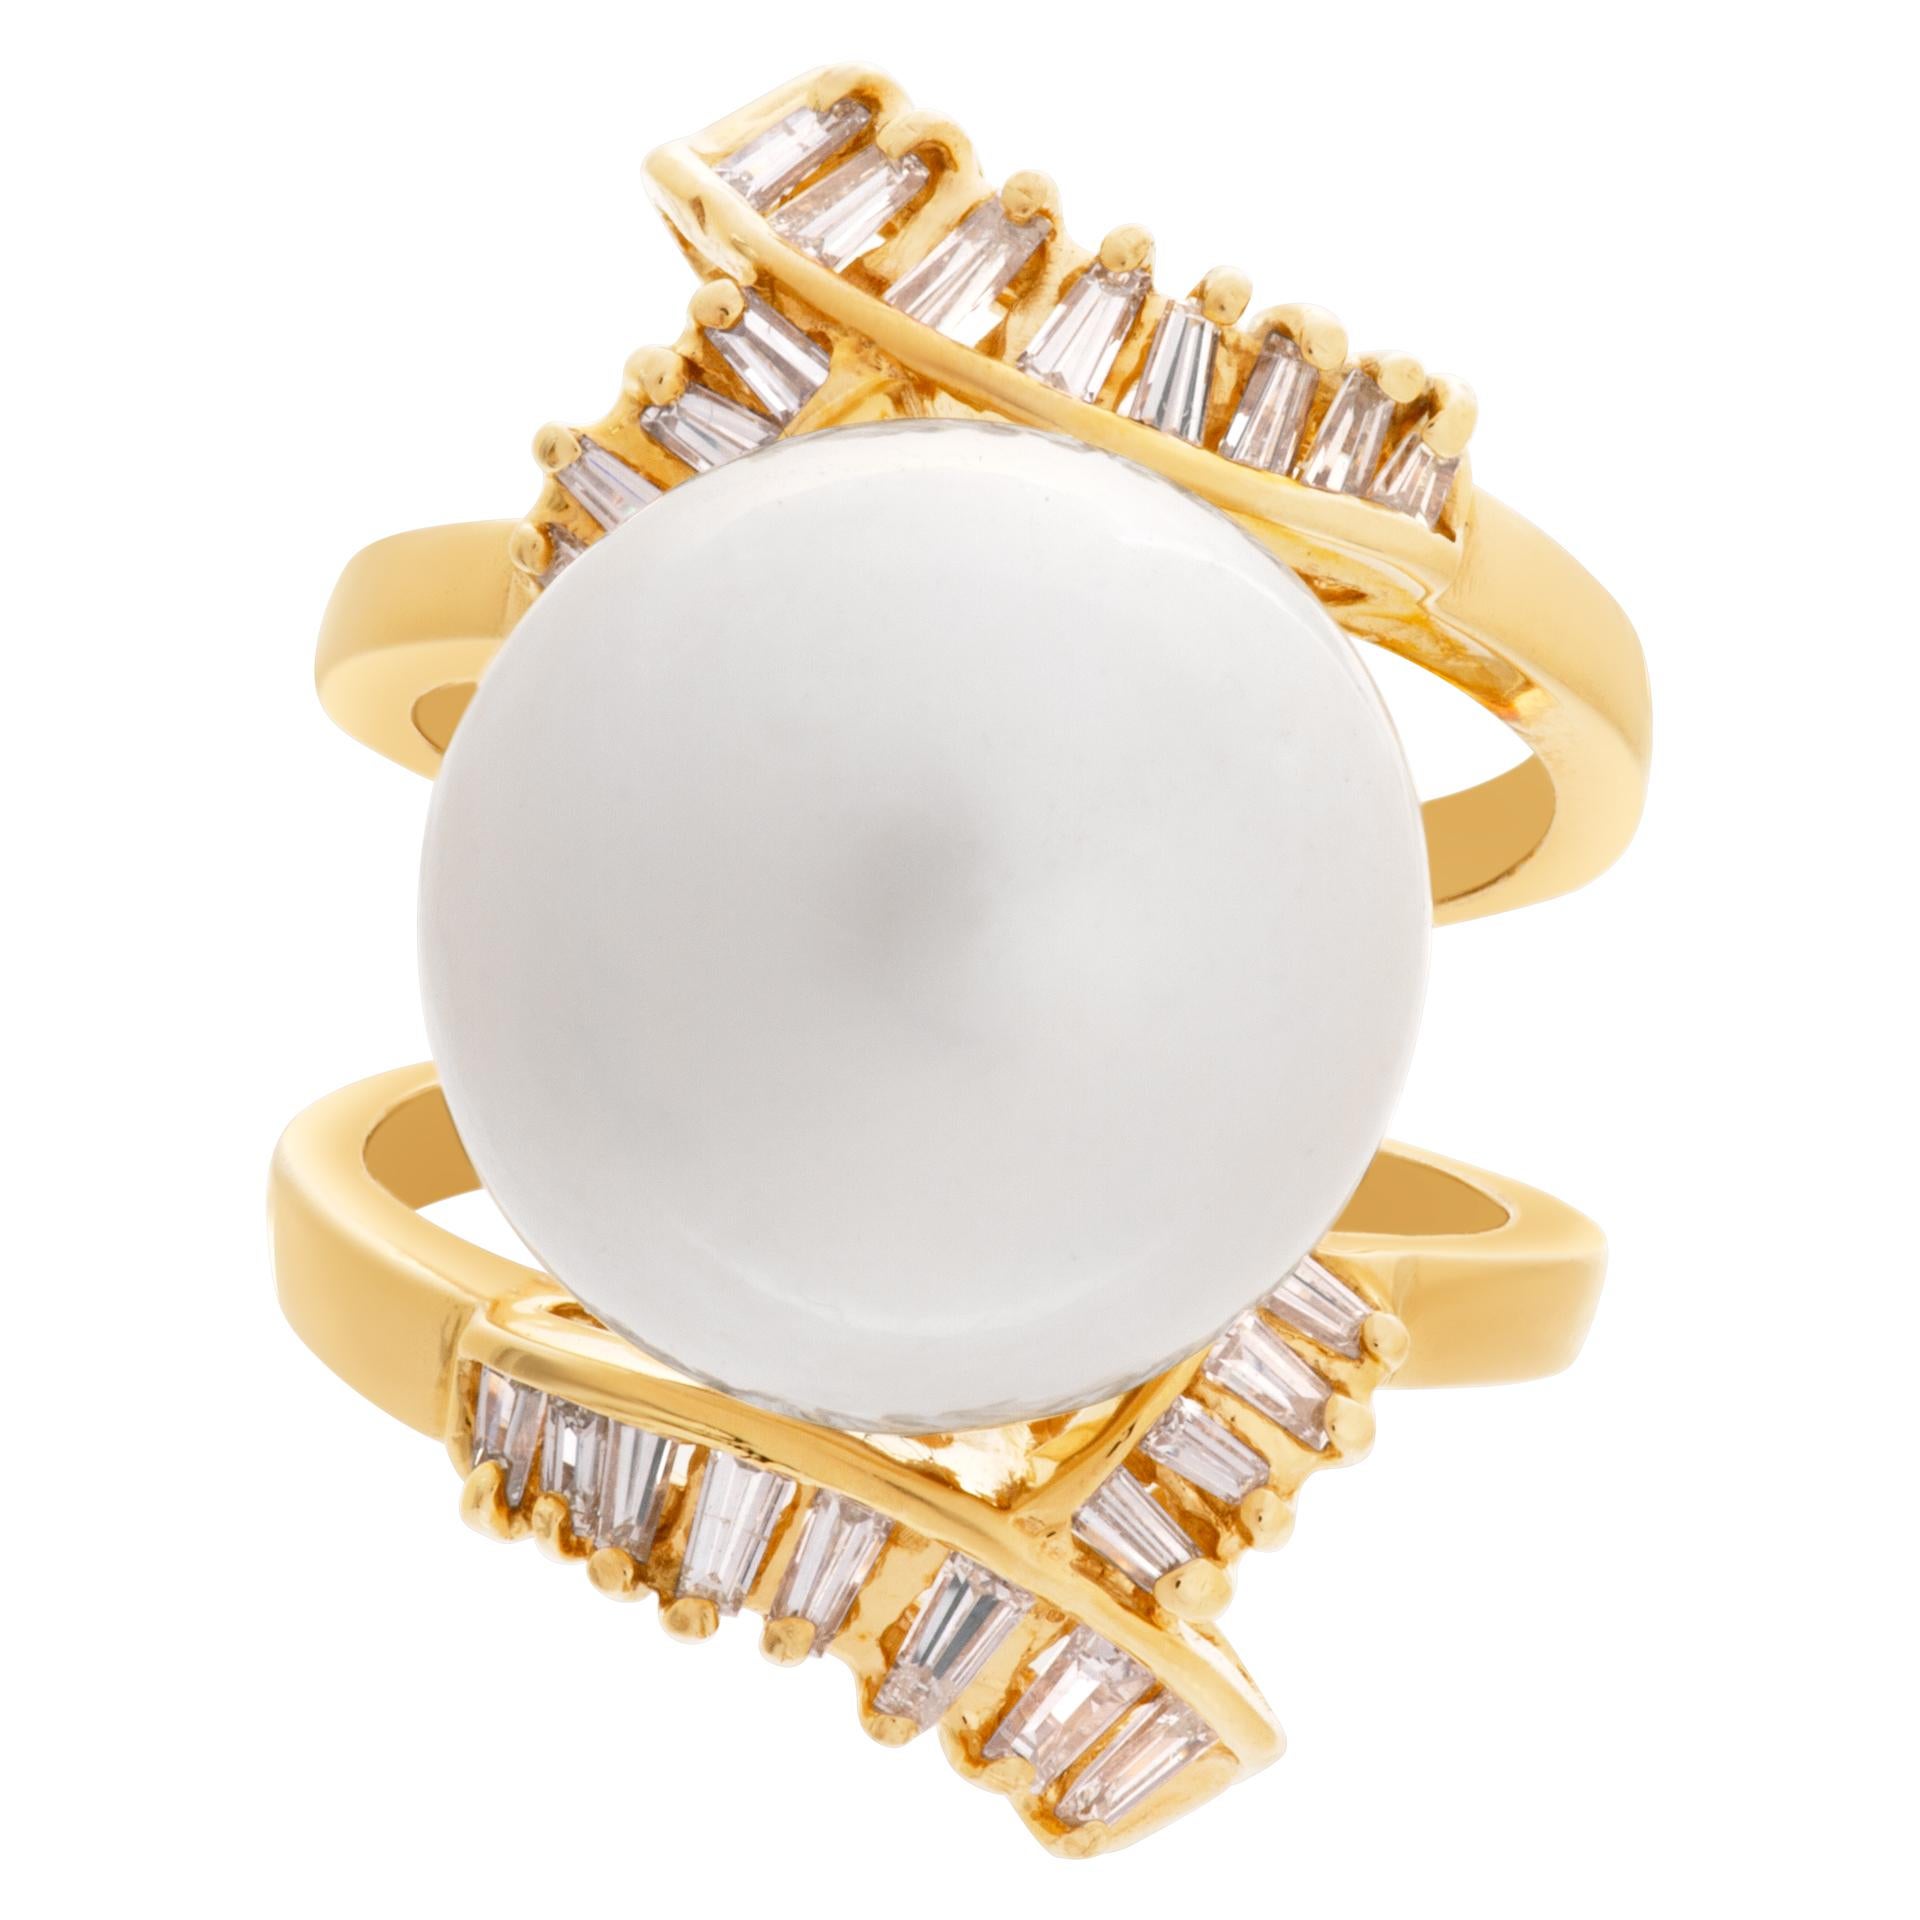 South Sea Pearl ring in 18k with approximately 0.30 carats in G-H color, VS-SI clarity diamond accents. Pearl is 14.5mm with very clean surface and strong lacre, with silver body and gold overtone. Size 6.25  This Pearl/diamond ring is currently